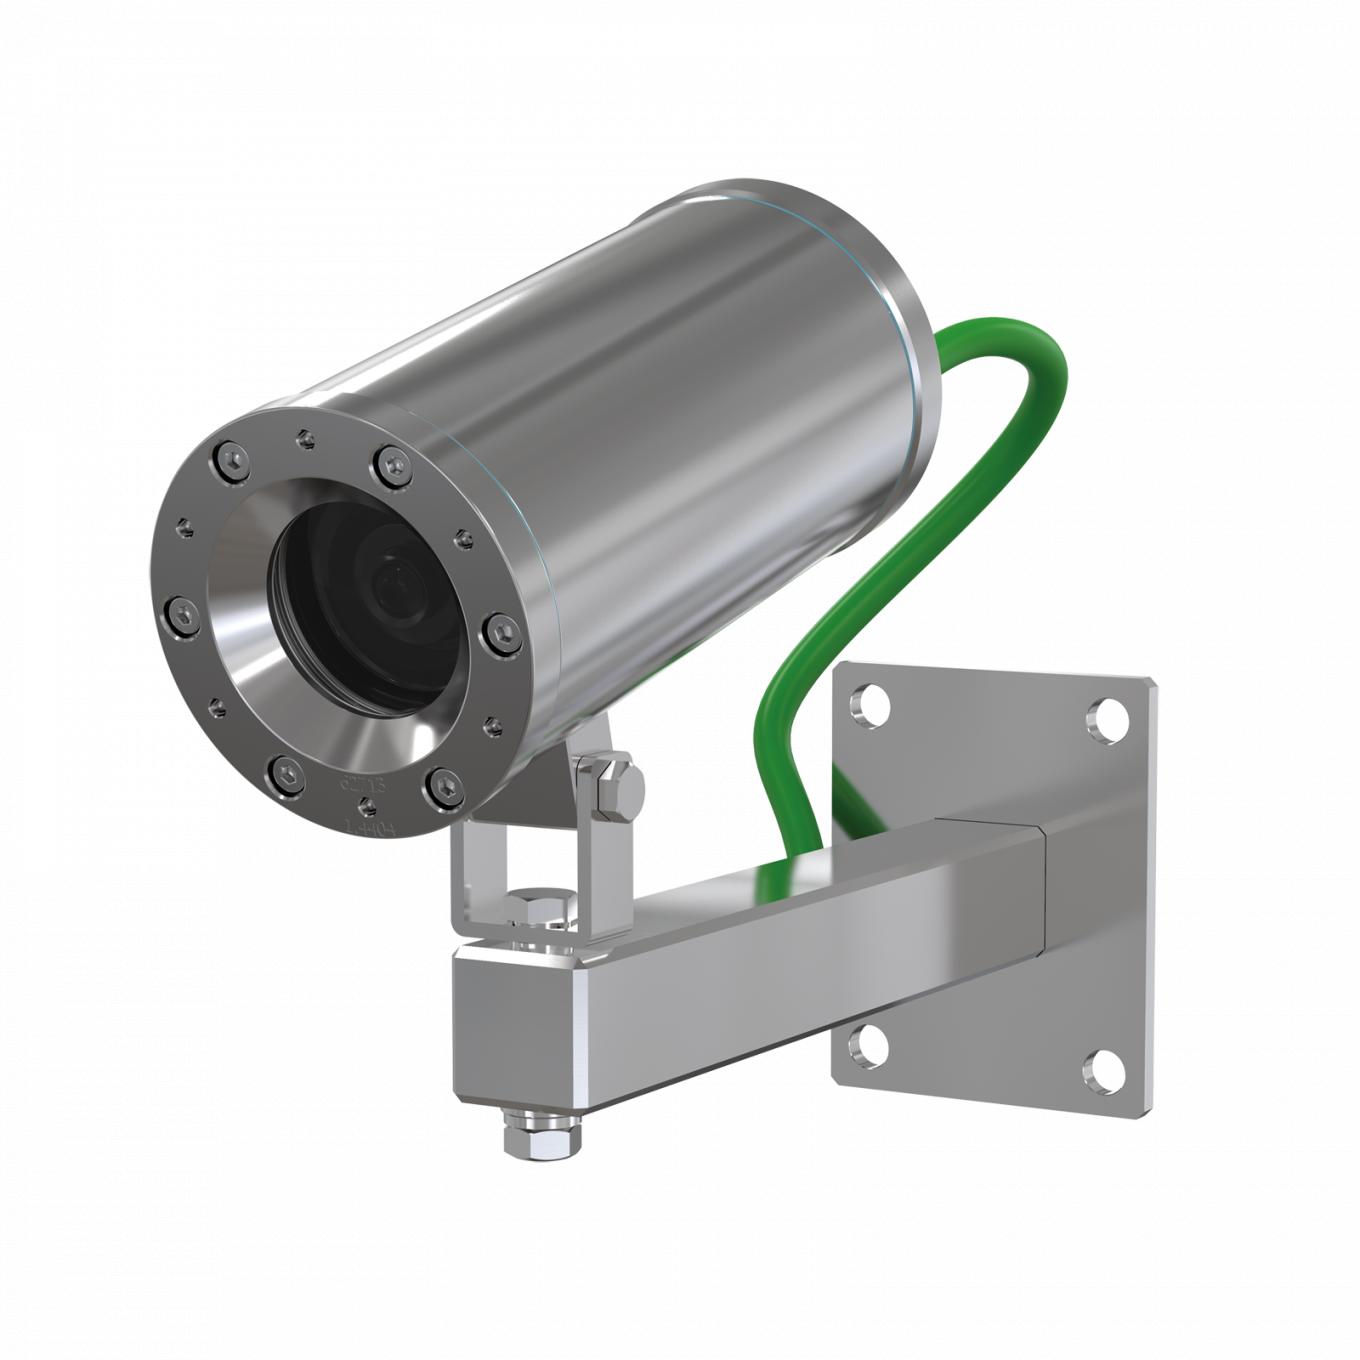 ExCam XF M3016 Explosion-Protected IP Camera aus Edelstahl, Wandmontage